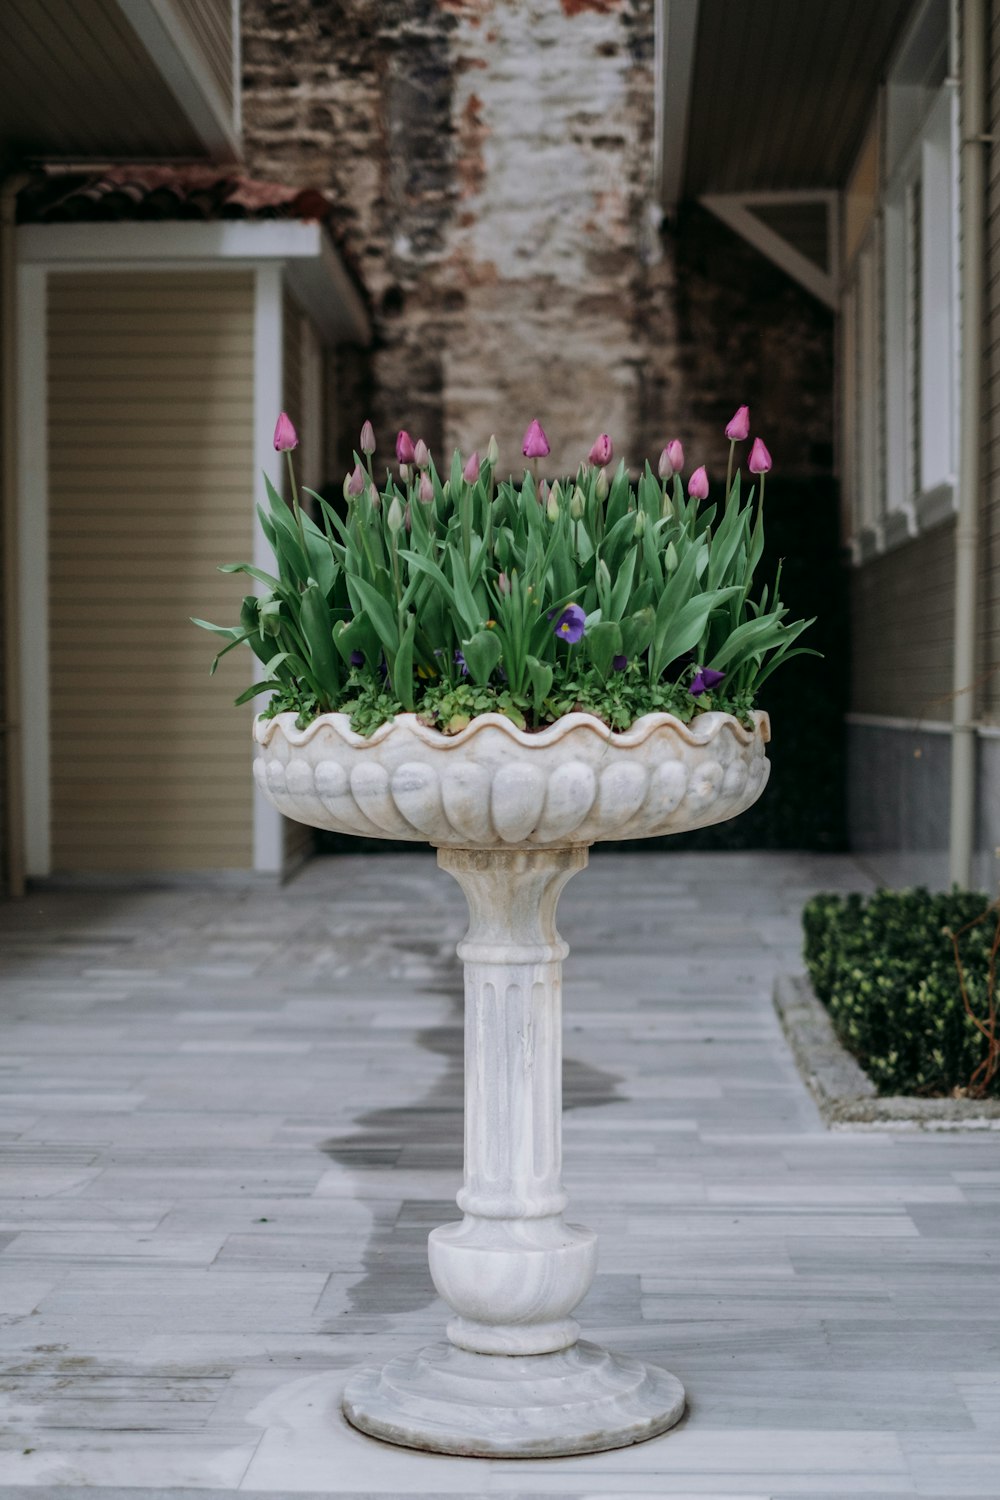 a planter with flowers in it sitting on a sidewalk